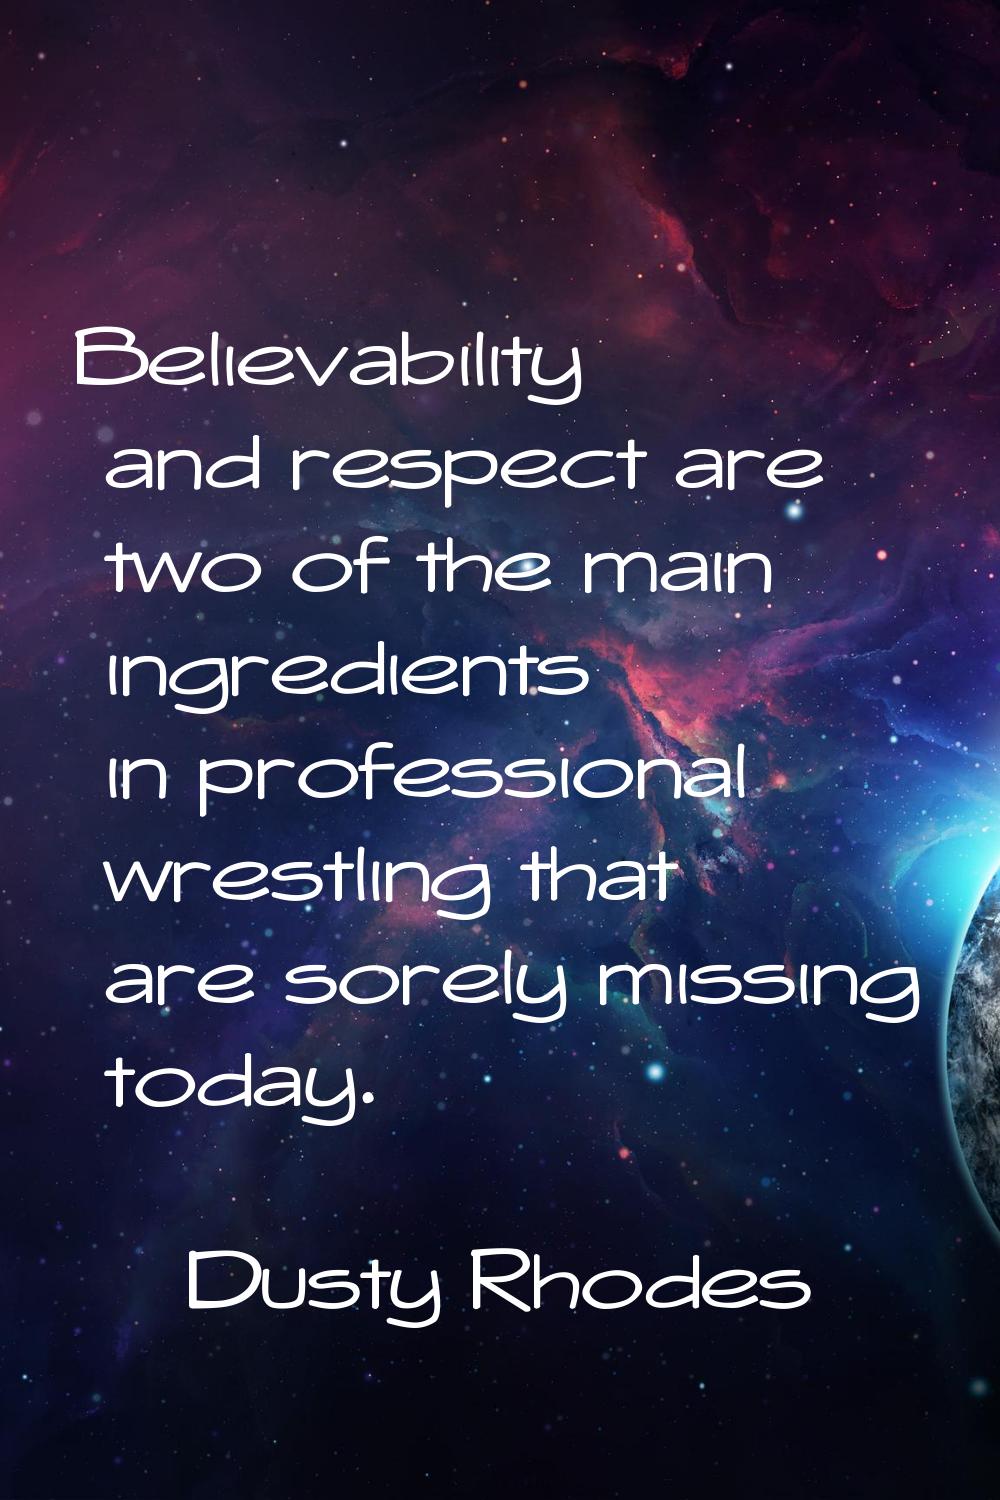 Believability and respect are two of the main ingredients in professional wrestling that are sorely